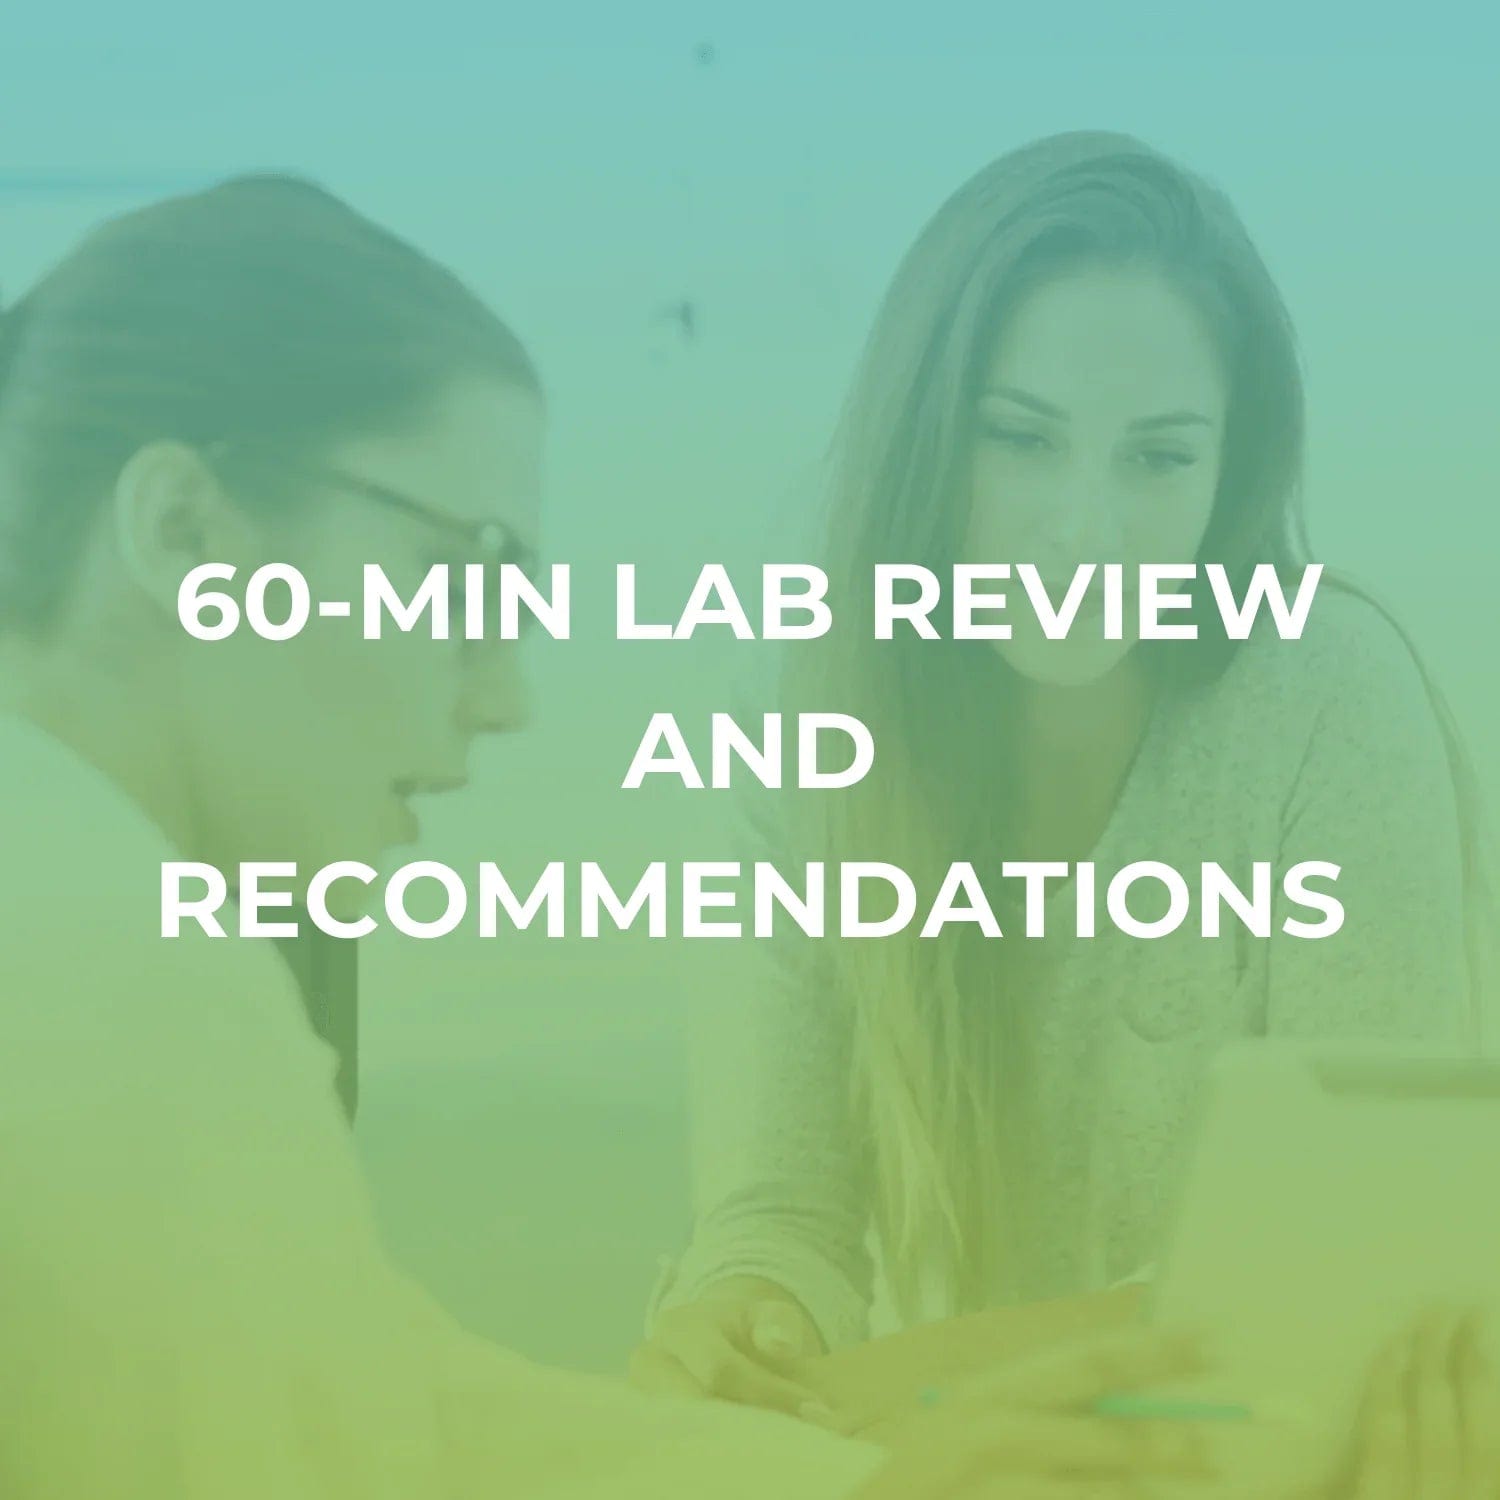 GLOW Natural Wellness Lab Review and Recommendations (60 Minutes)